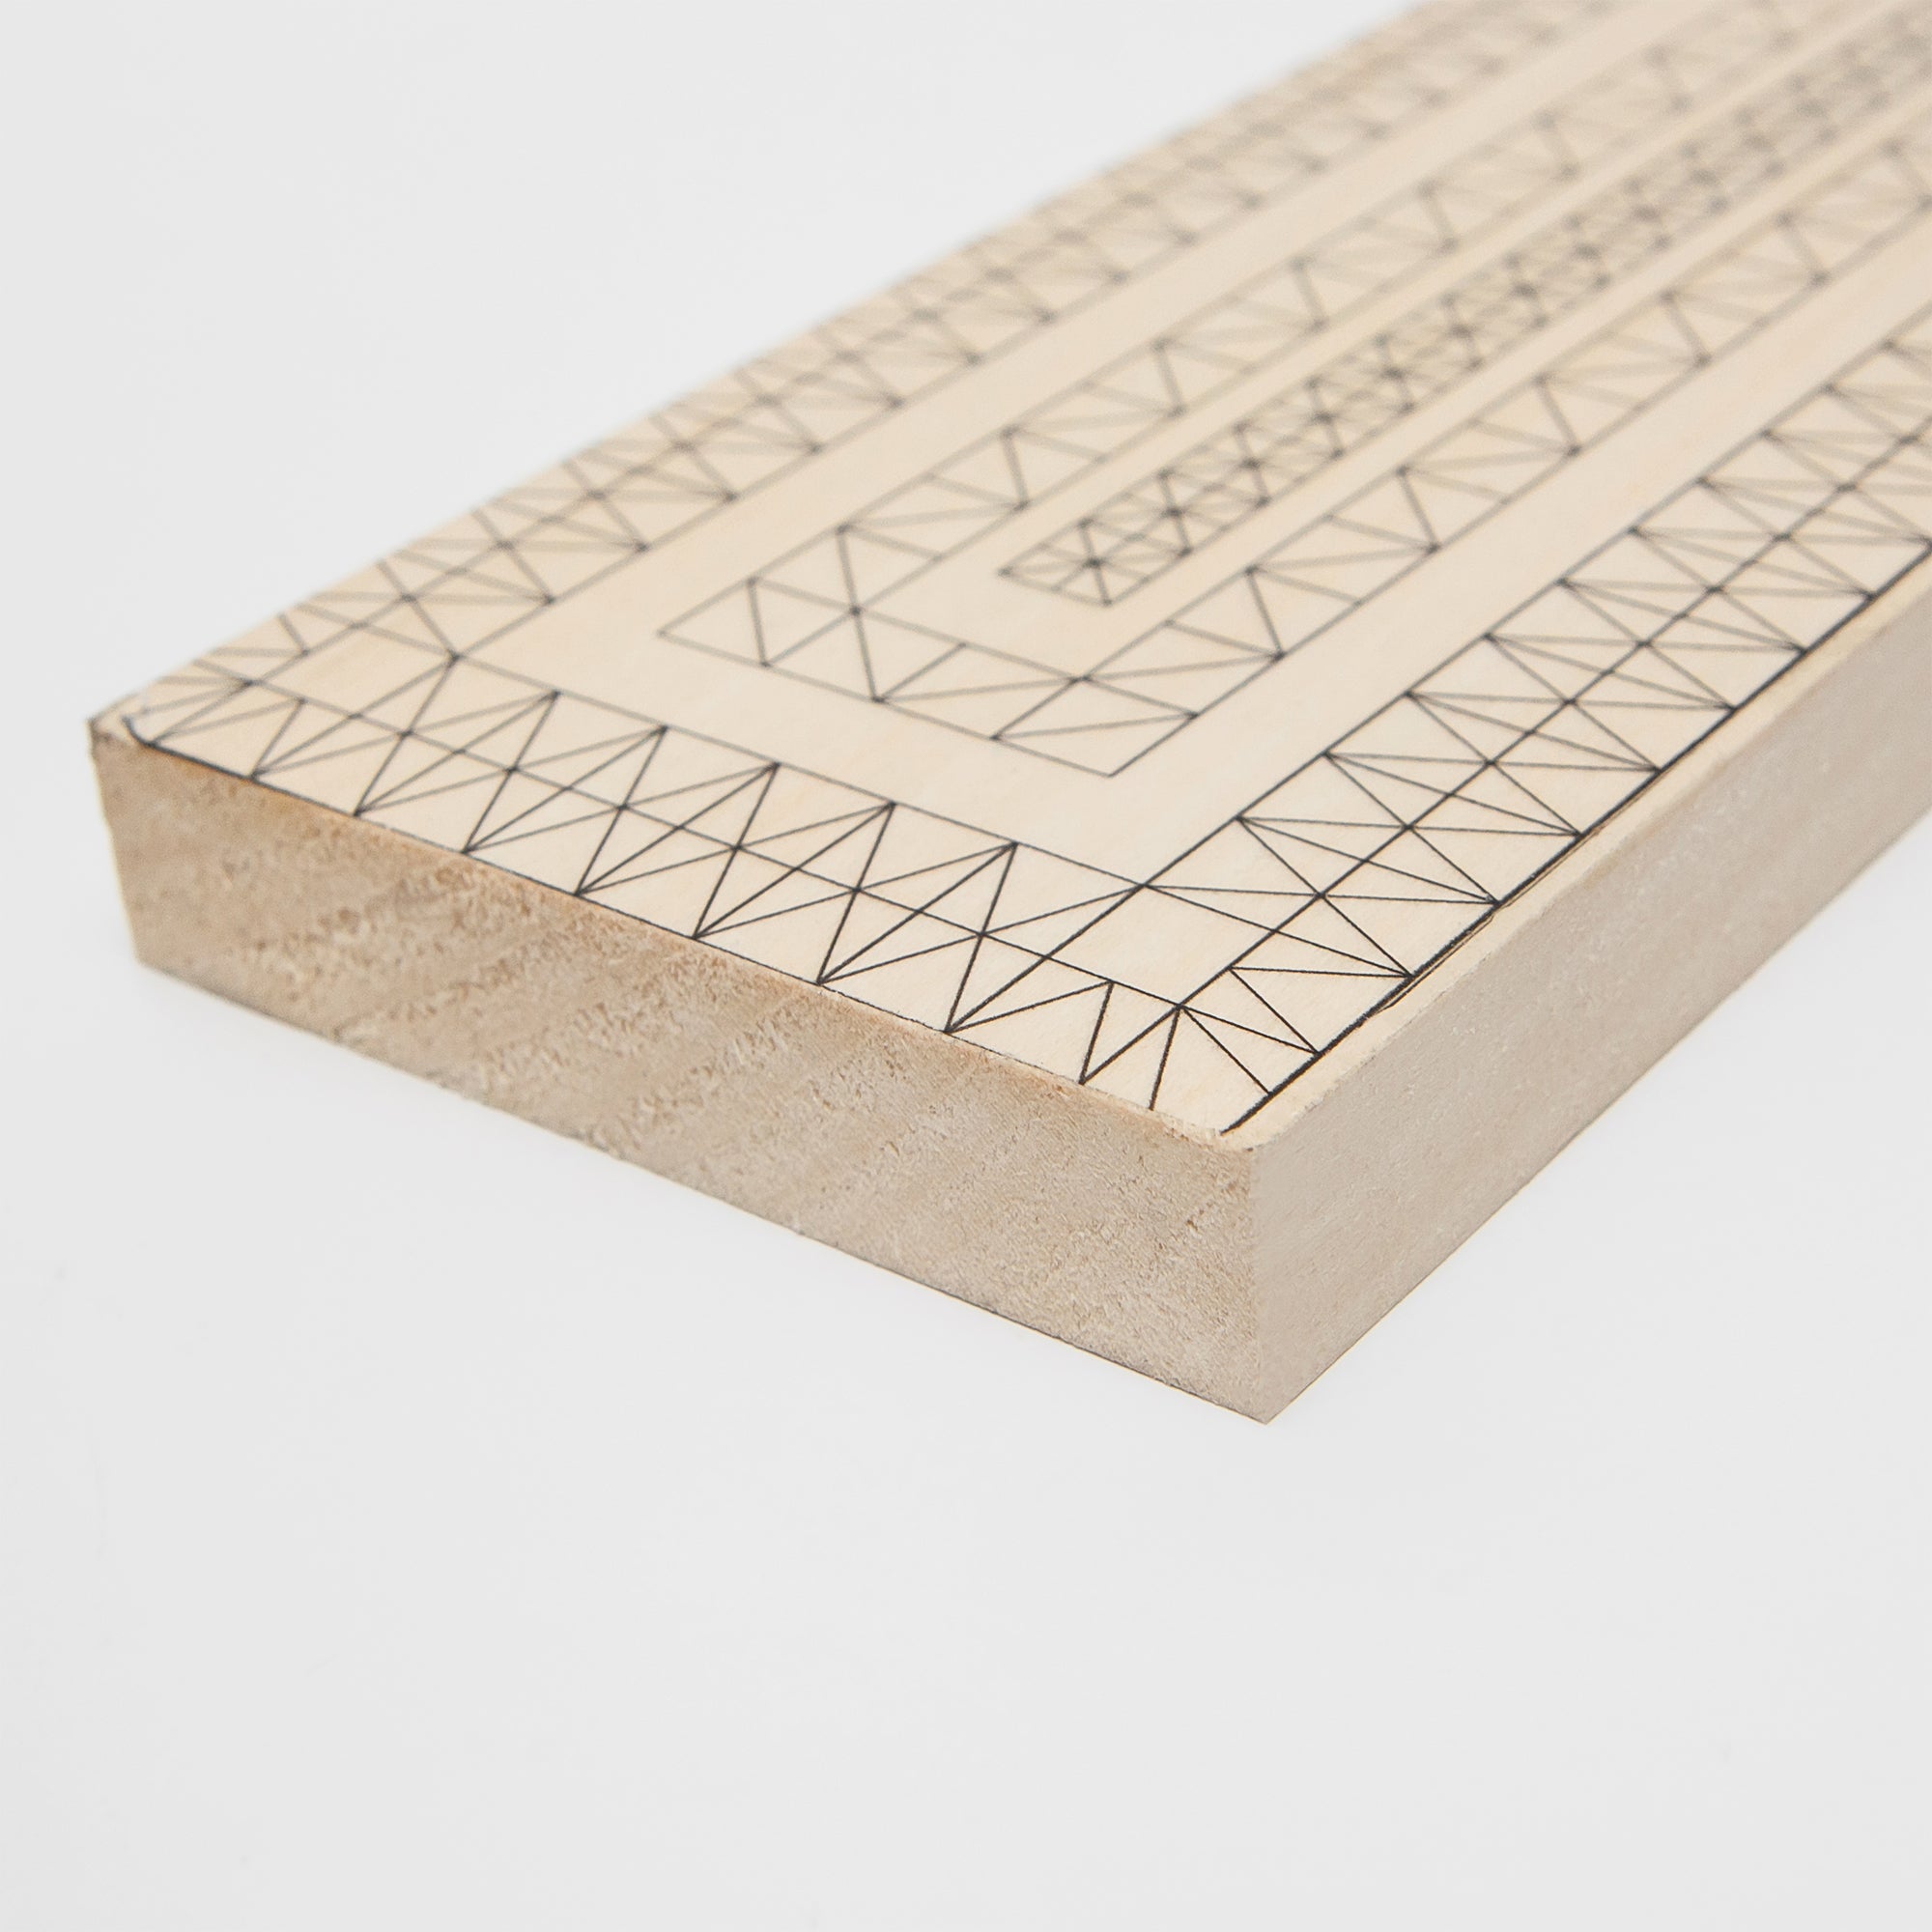 Basswood Practice or Building Boards » ChippingAway